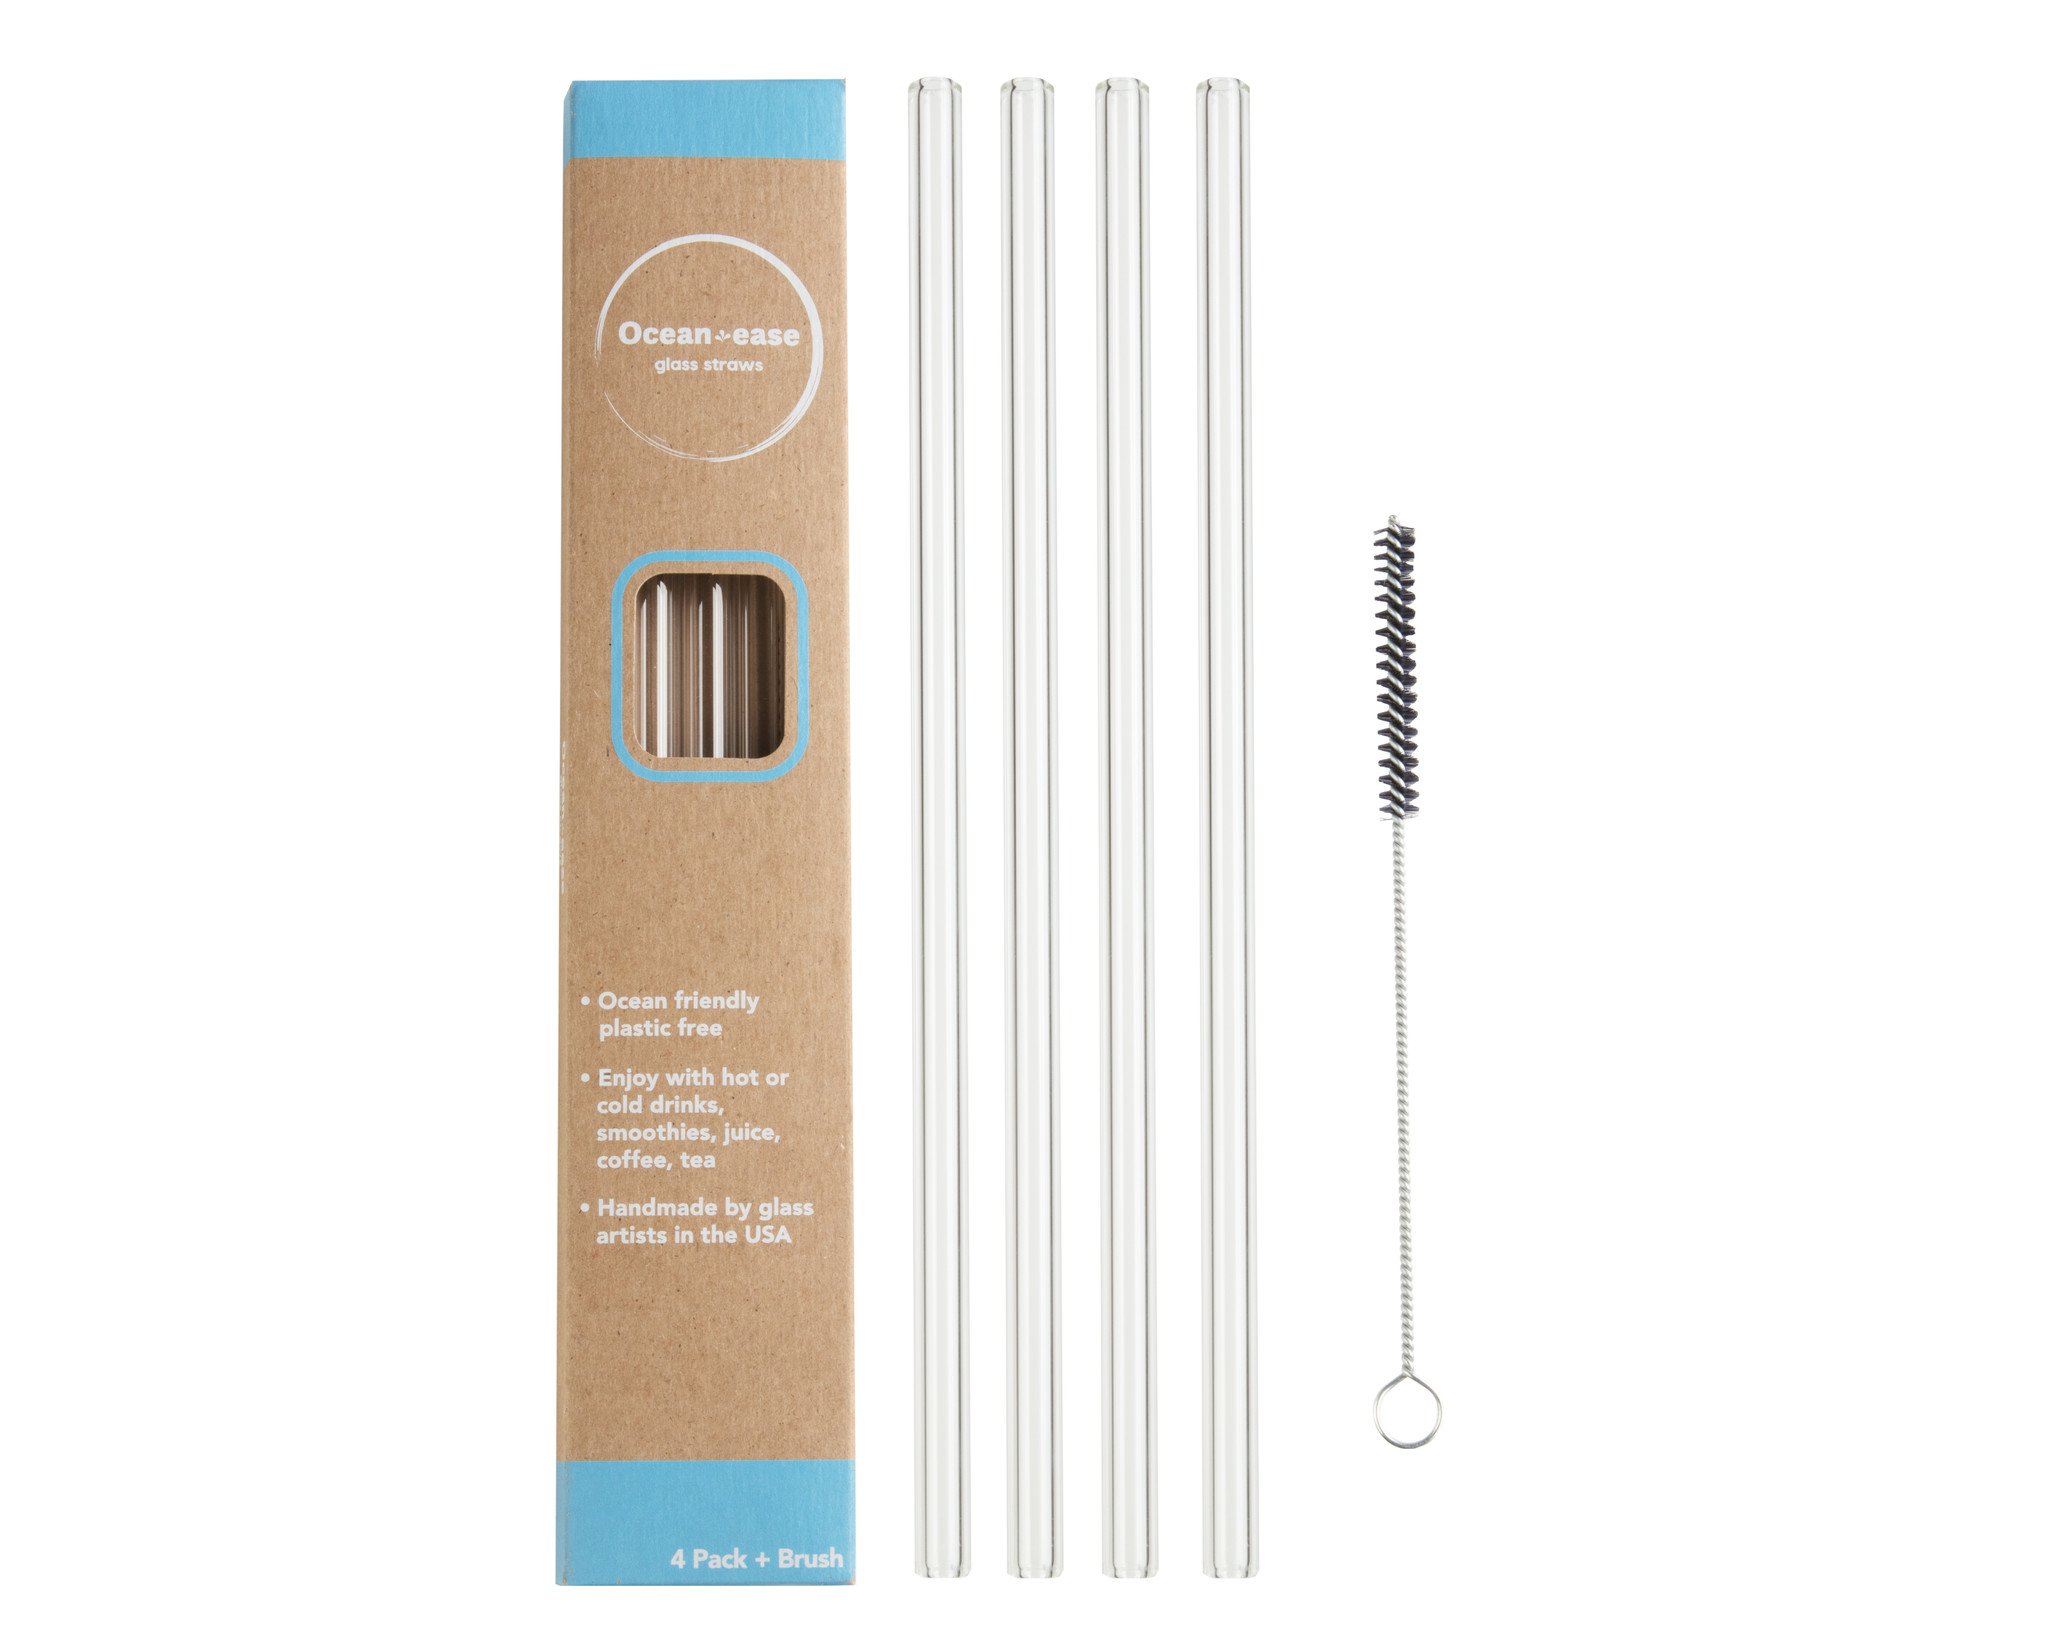 Naeco 18/8 Stainless Steel Reusable Straws With Cleaning Brush Set Of 4 